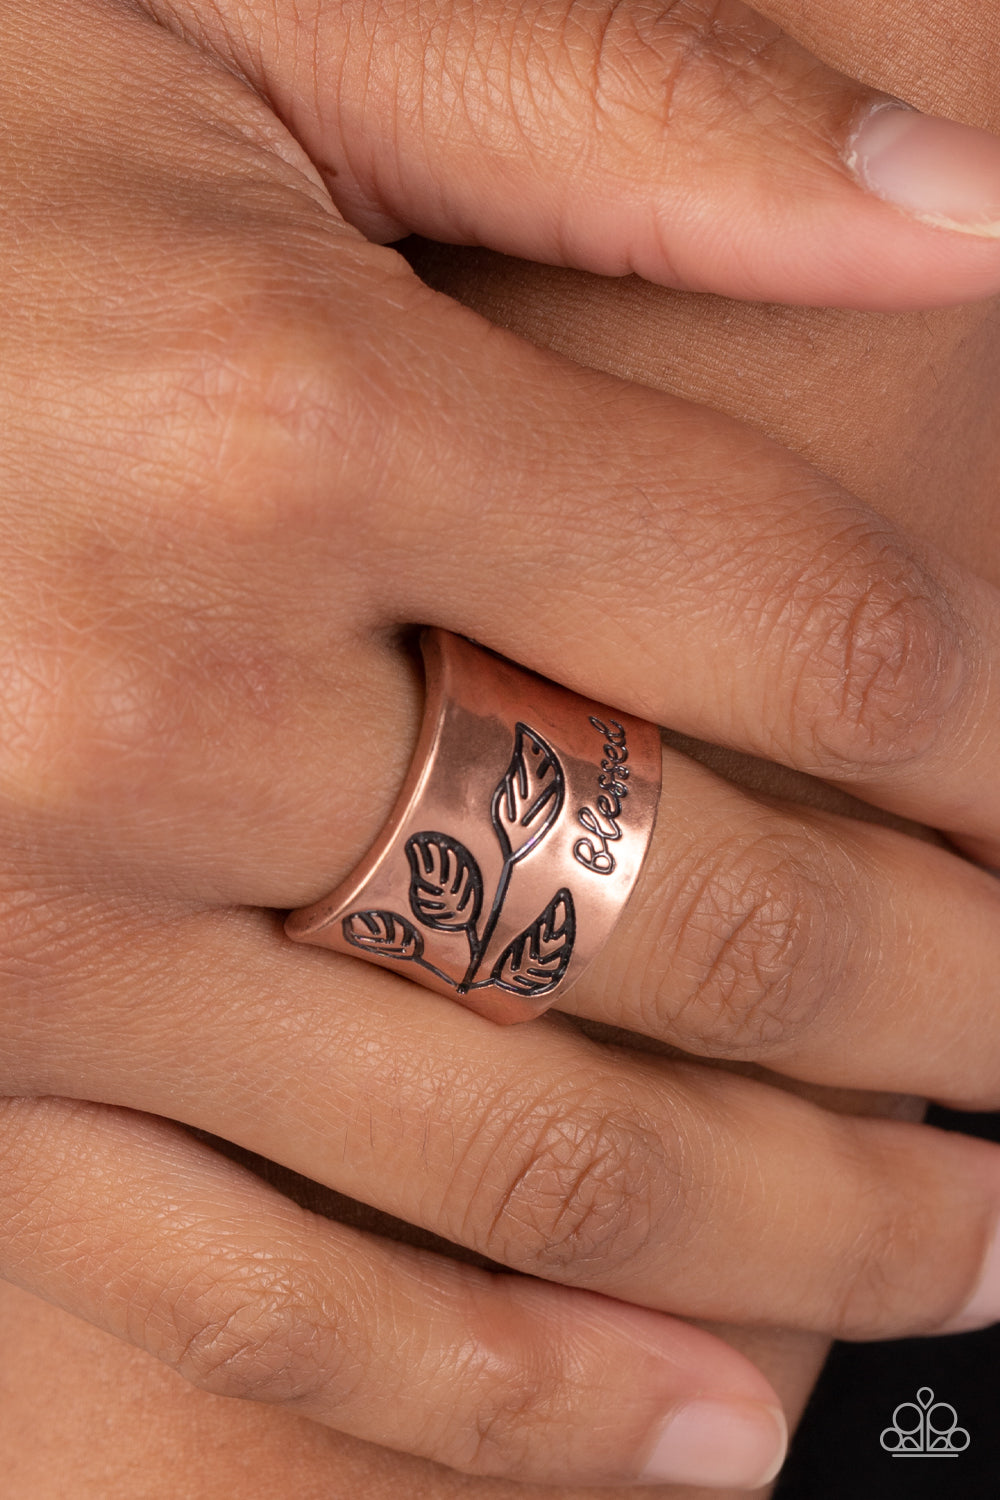 Paparazzi Rings - Blessed with Bling - Copper